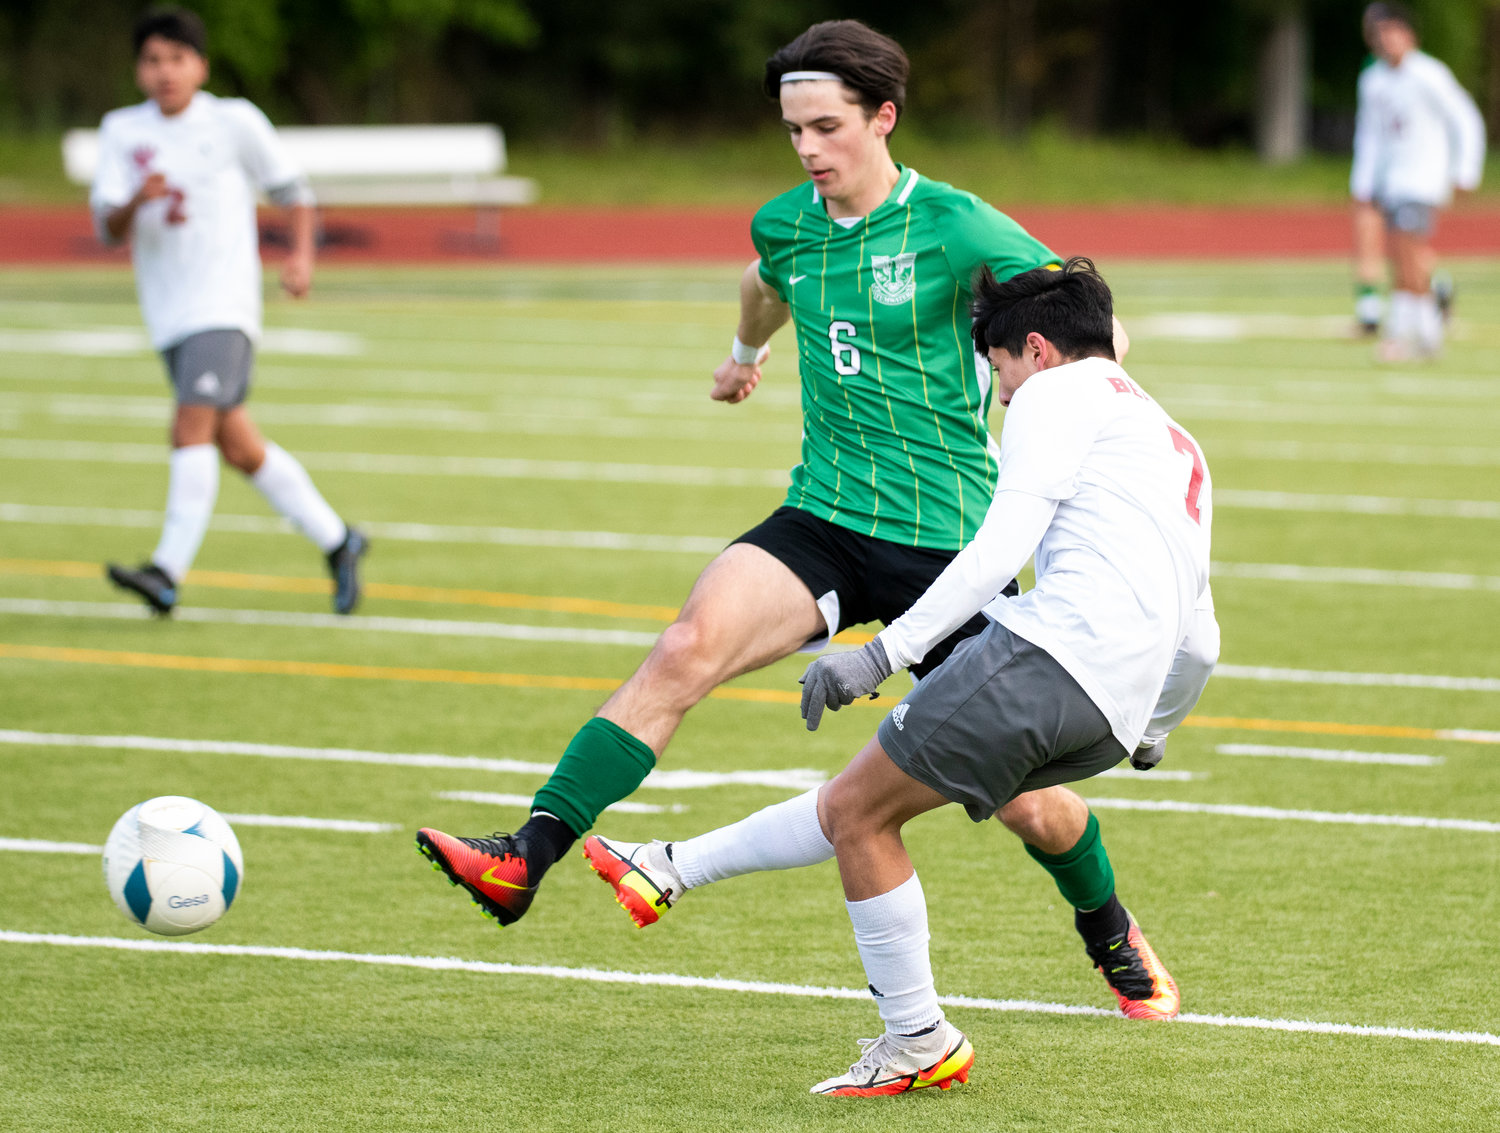 W.F. West's Damian Hernandez (7) shoots a pass past Tumwater's William Lower (6) during the district semifinals on May 12.